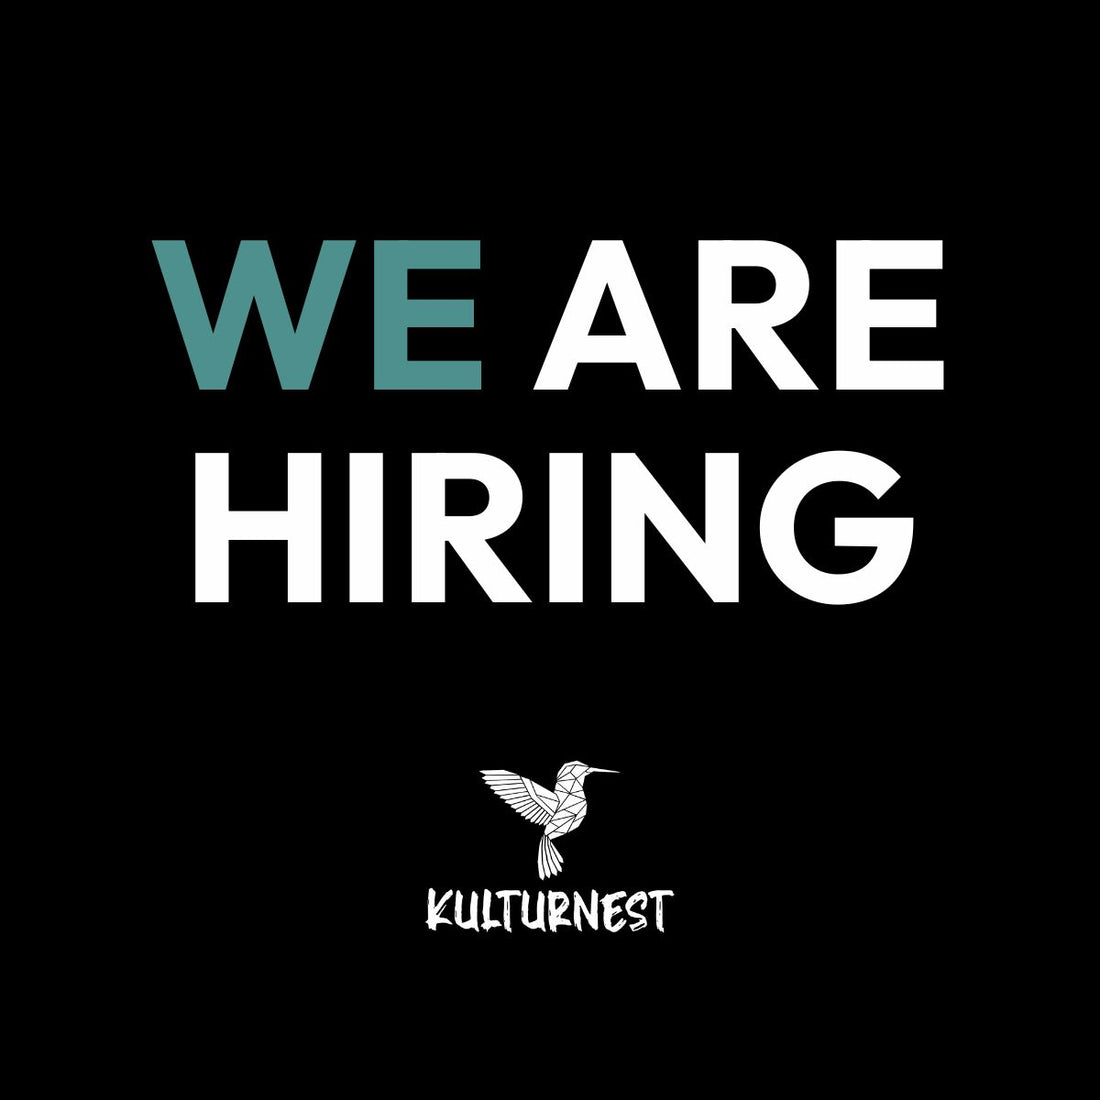 Kulturnest is Hiring - Are you the one?